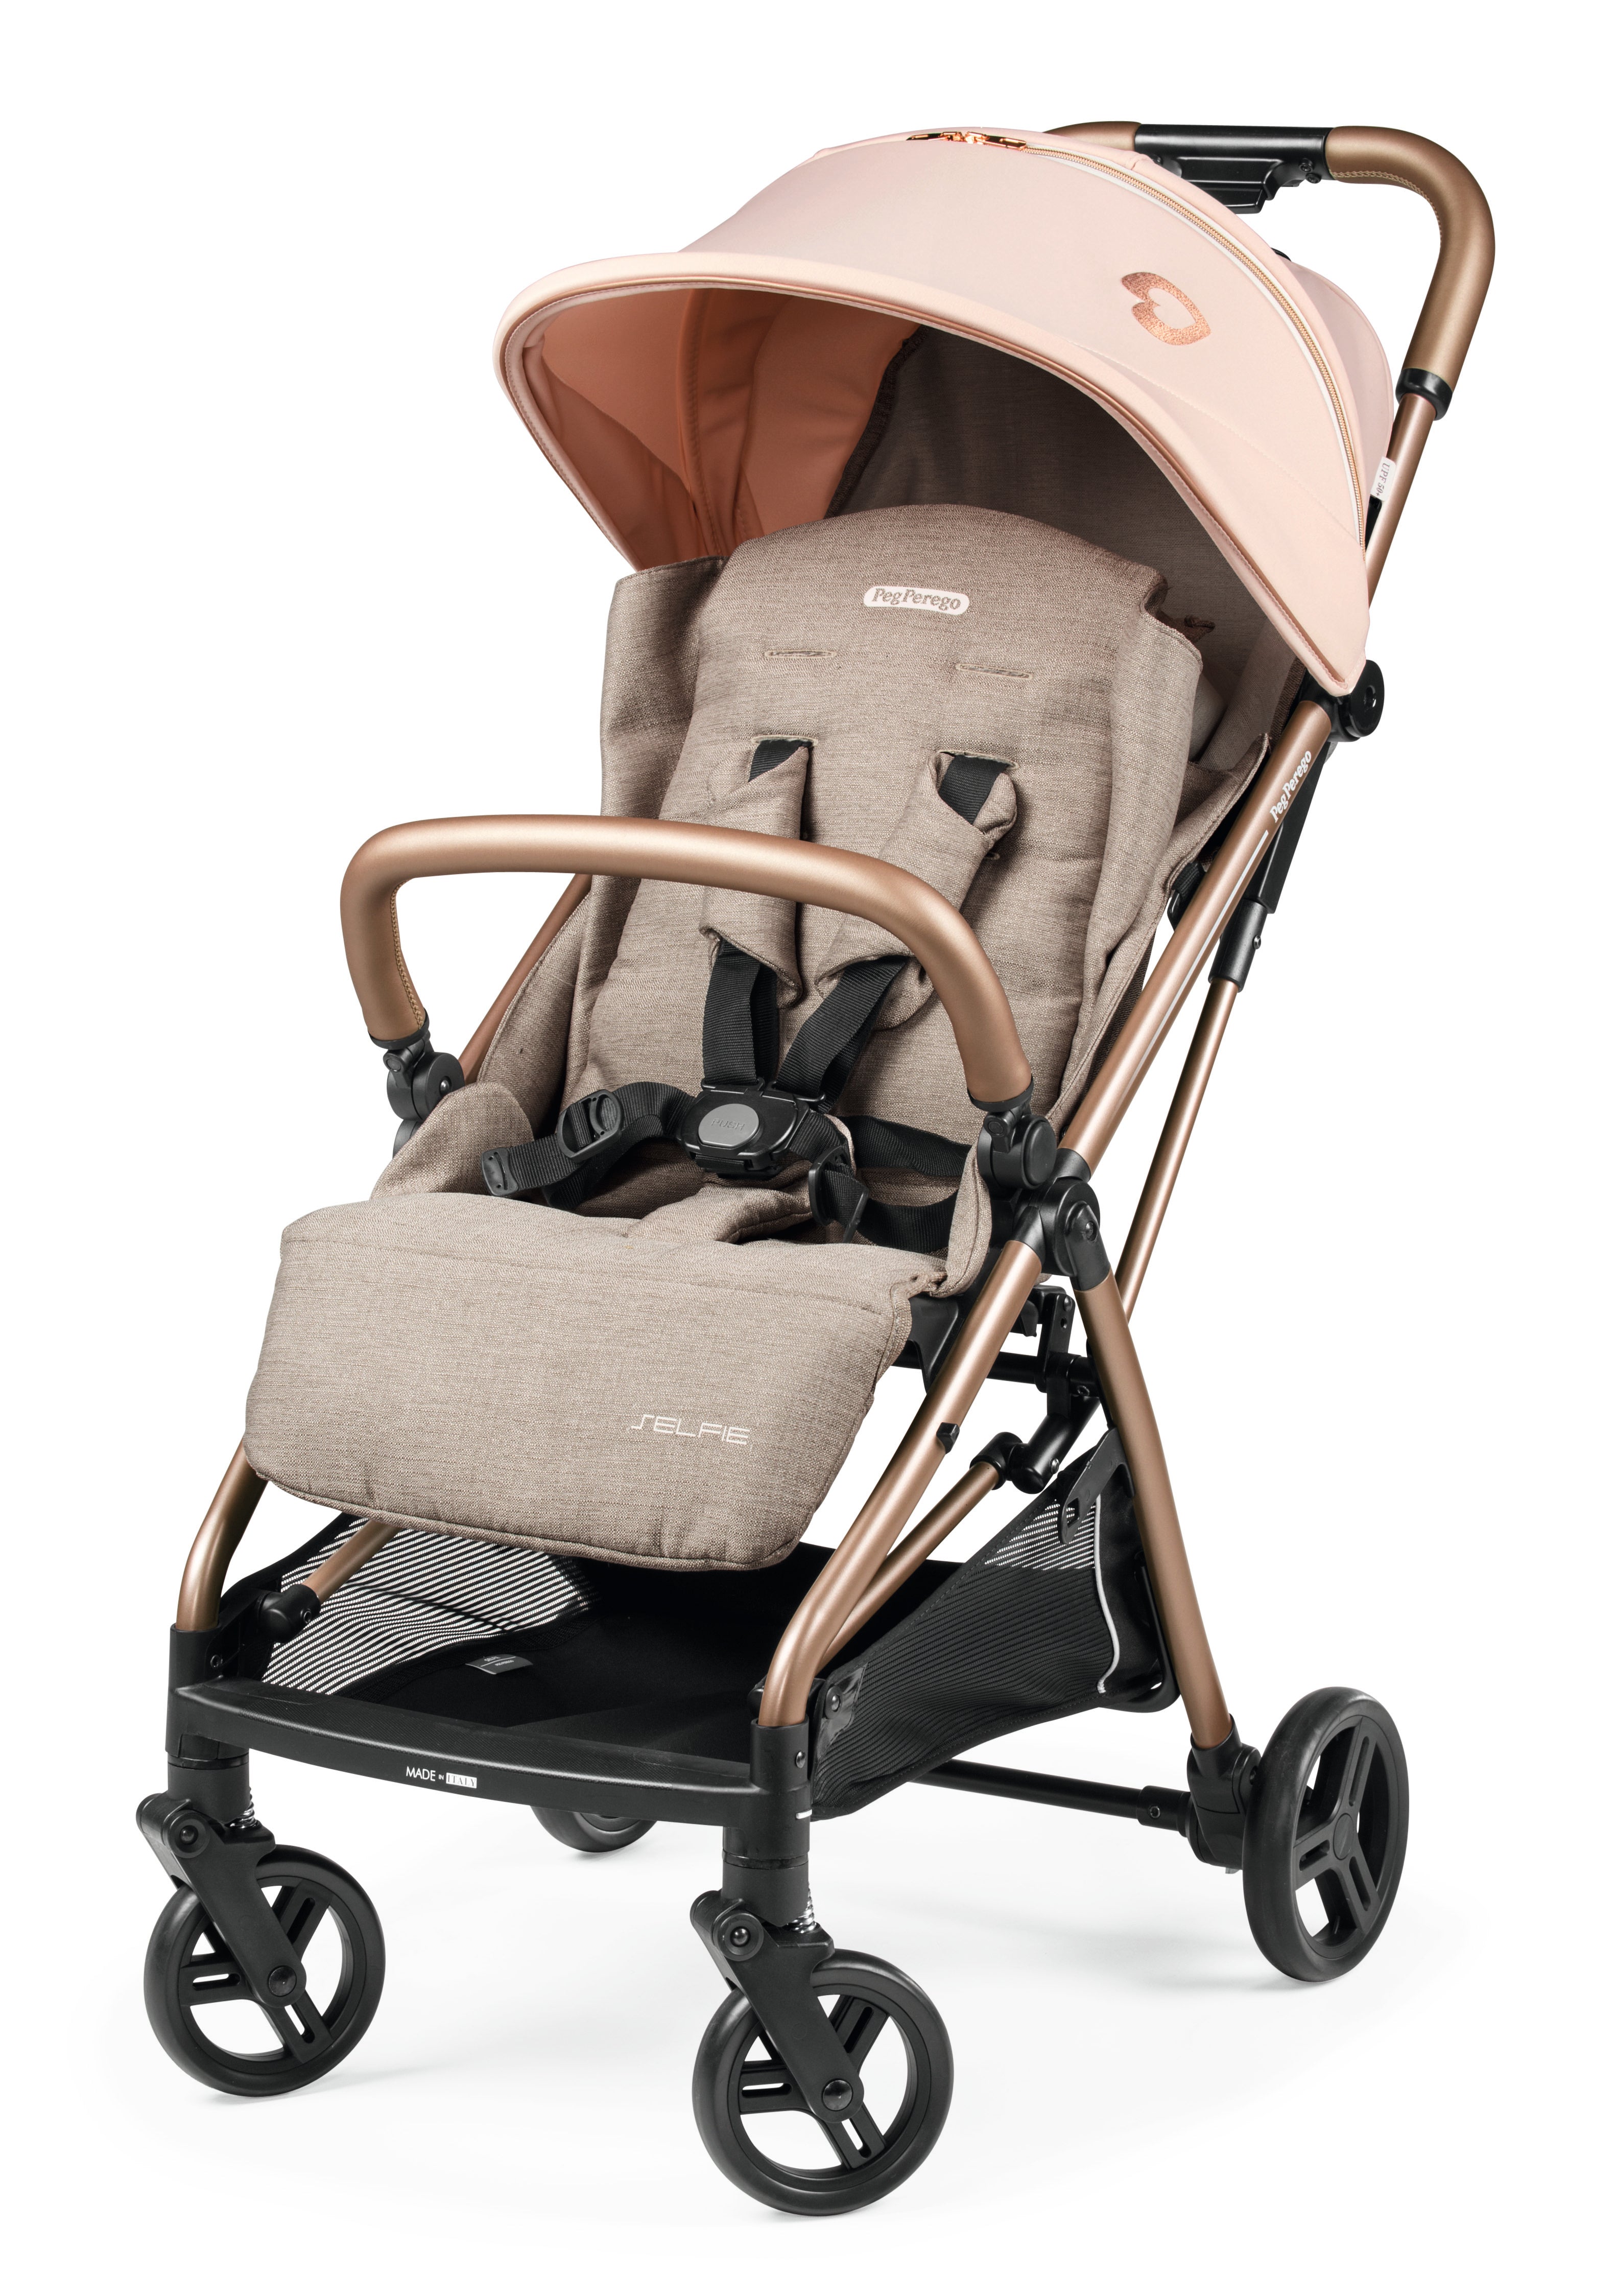 Selfie Stroller Mon Amour Pink - Trendy, Compact, and Lightweight Stroller for Babies. Now available on CB Baby online shop in South Africa.